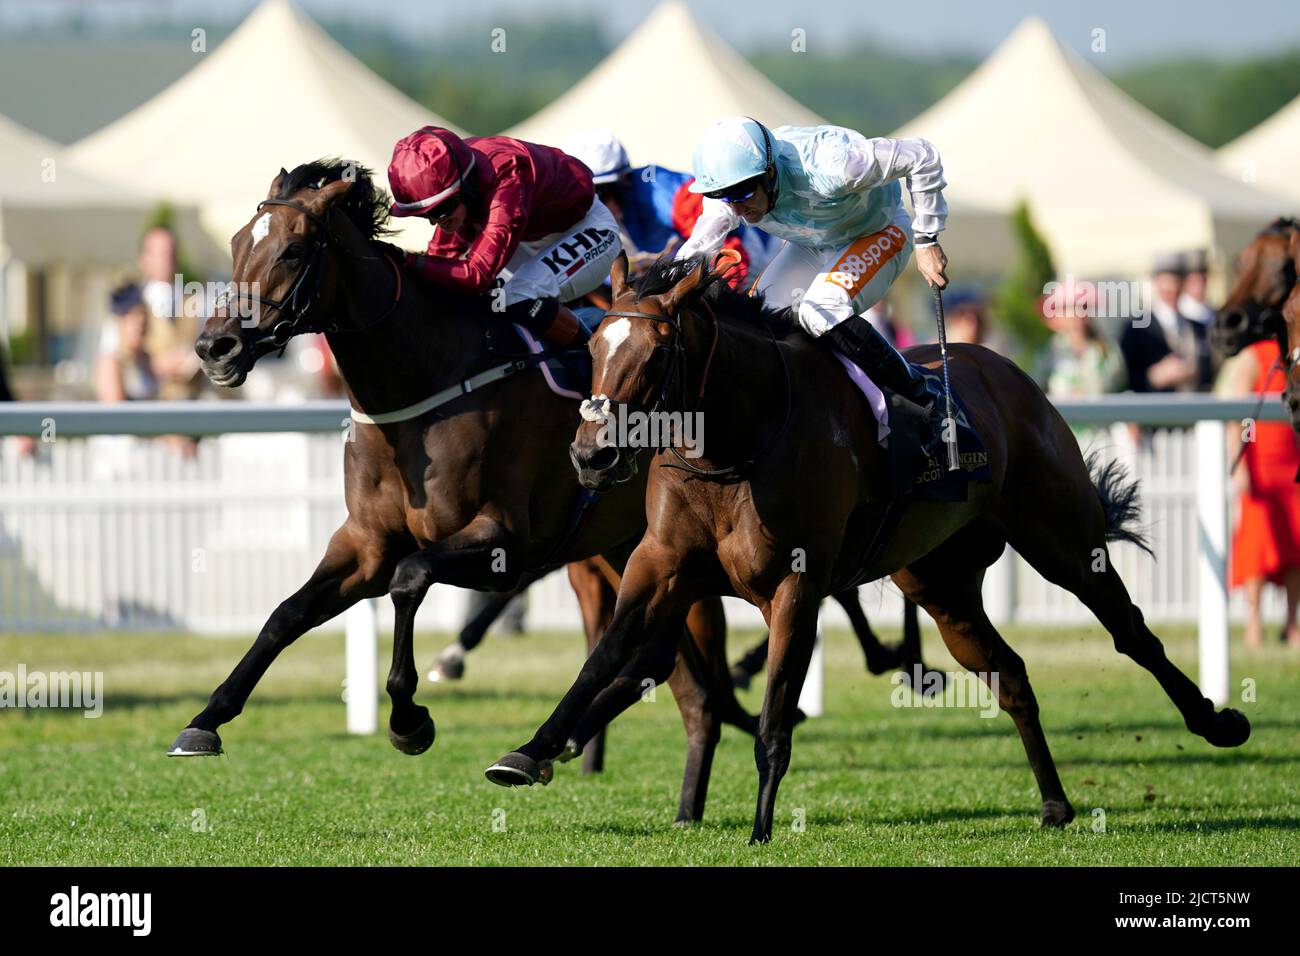 Rising star (right) ridden by Neil Callan comes home to win The Kensington Palace Stakes from second placed Random Harvest, (left) ridden by Saffie Osborne during day two of Royal Ascot at Ascot Racecourse. Picture date: Wednesday June 15, 2022. Stock Photo